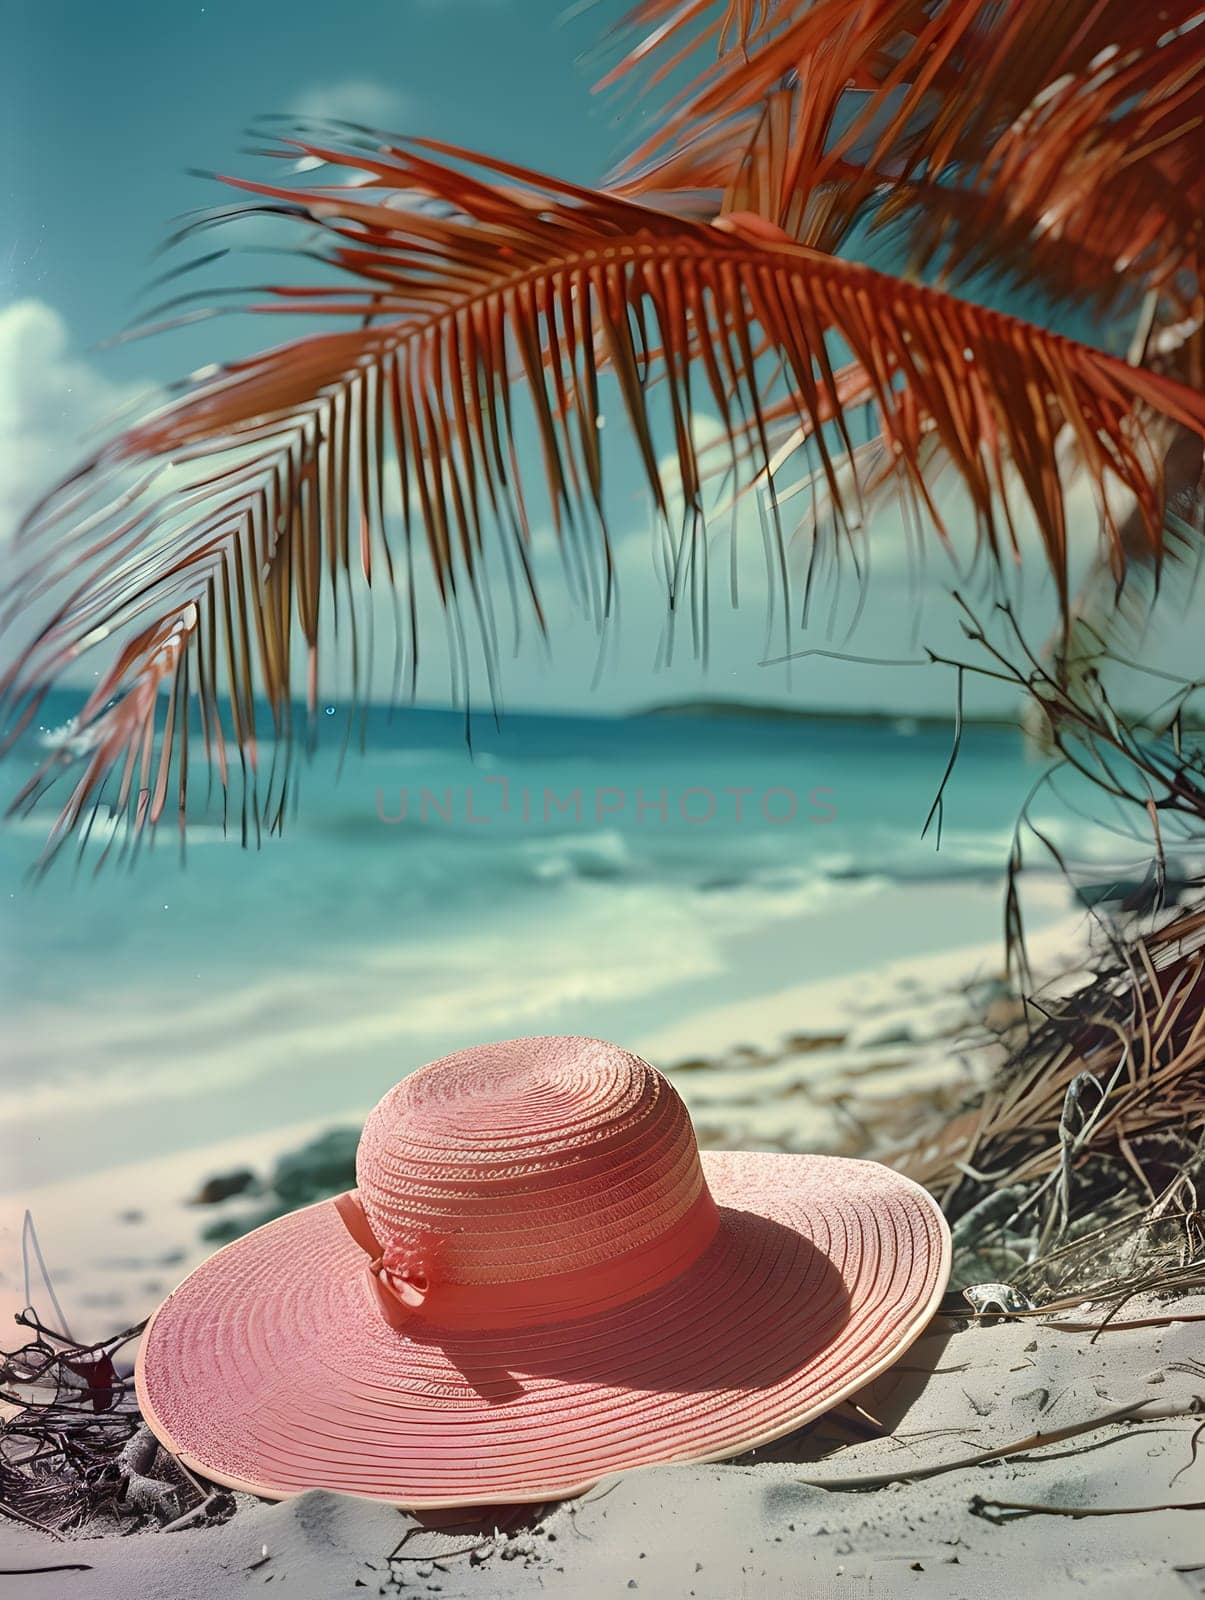 A pink hat lies on the sandy beach under a swaying palm tree, creating a picturesque scene against the azure sky and tranquil body of water. Perfect for a travel photograph